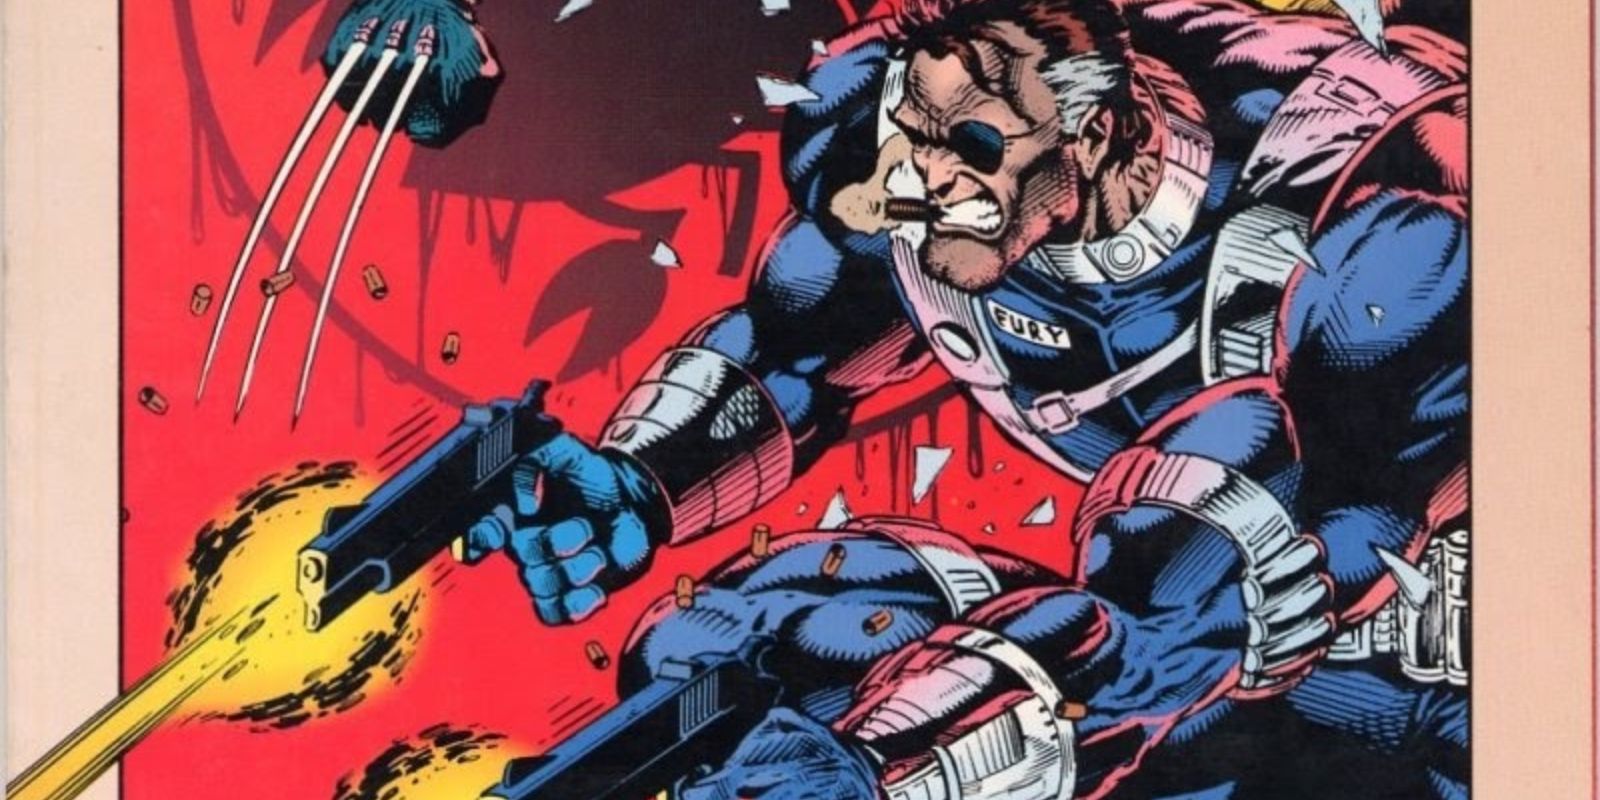 Nick Fury firing two guns on a cover in Marvel Comics